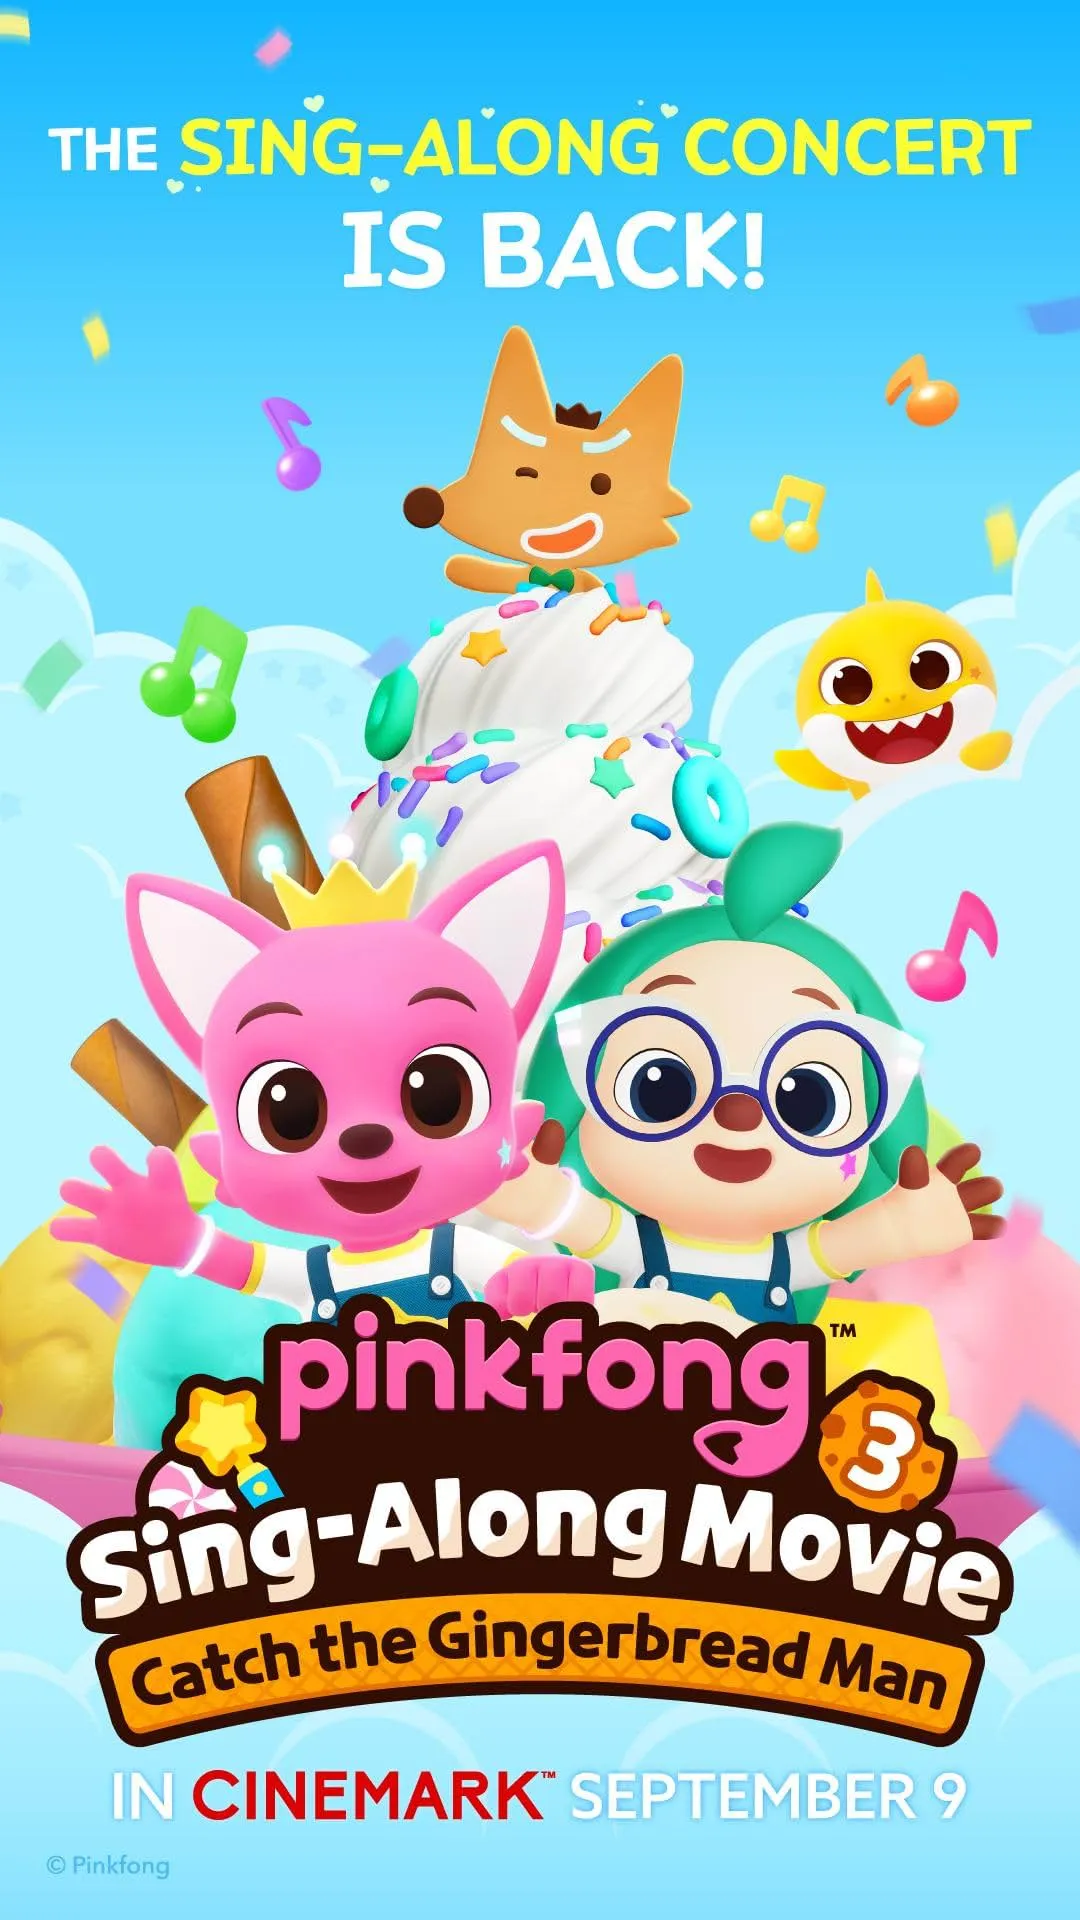     Pinkfong Sing-Along Movie 3: Catch the Gingerbread Man